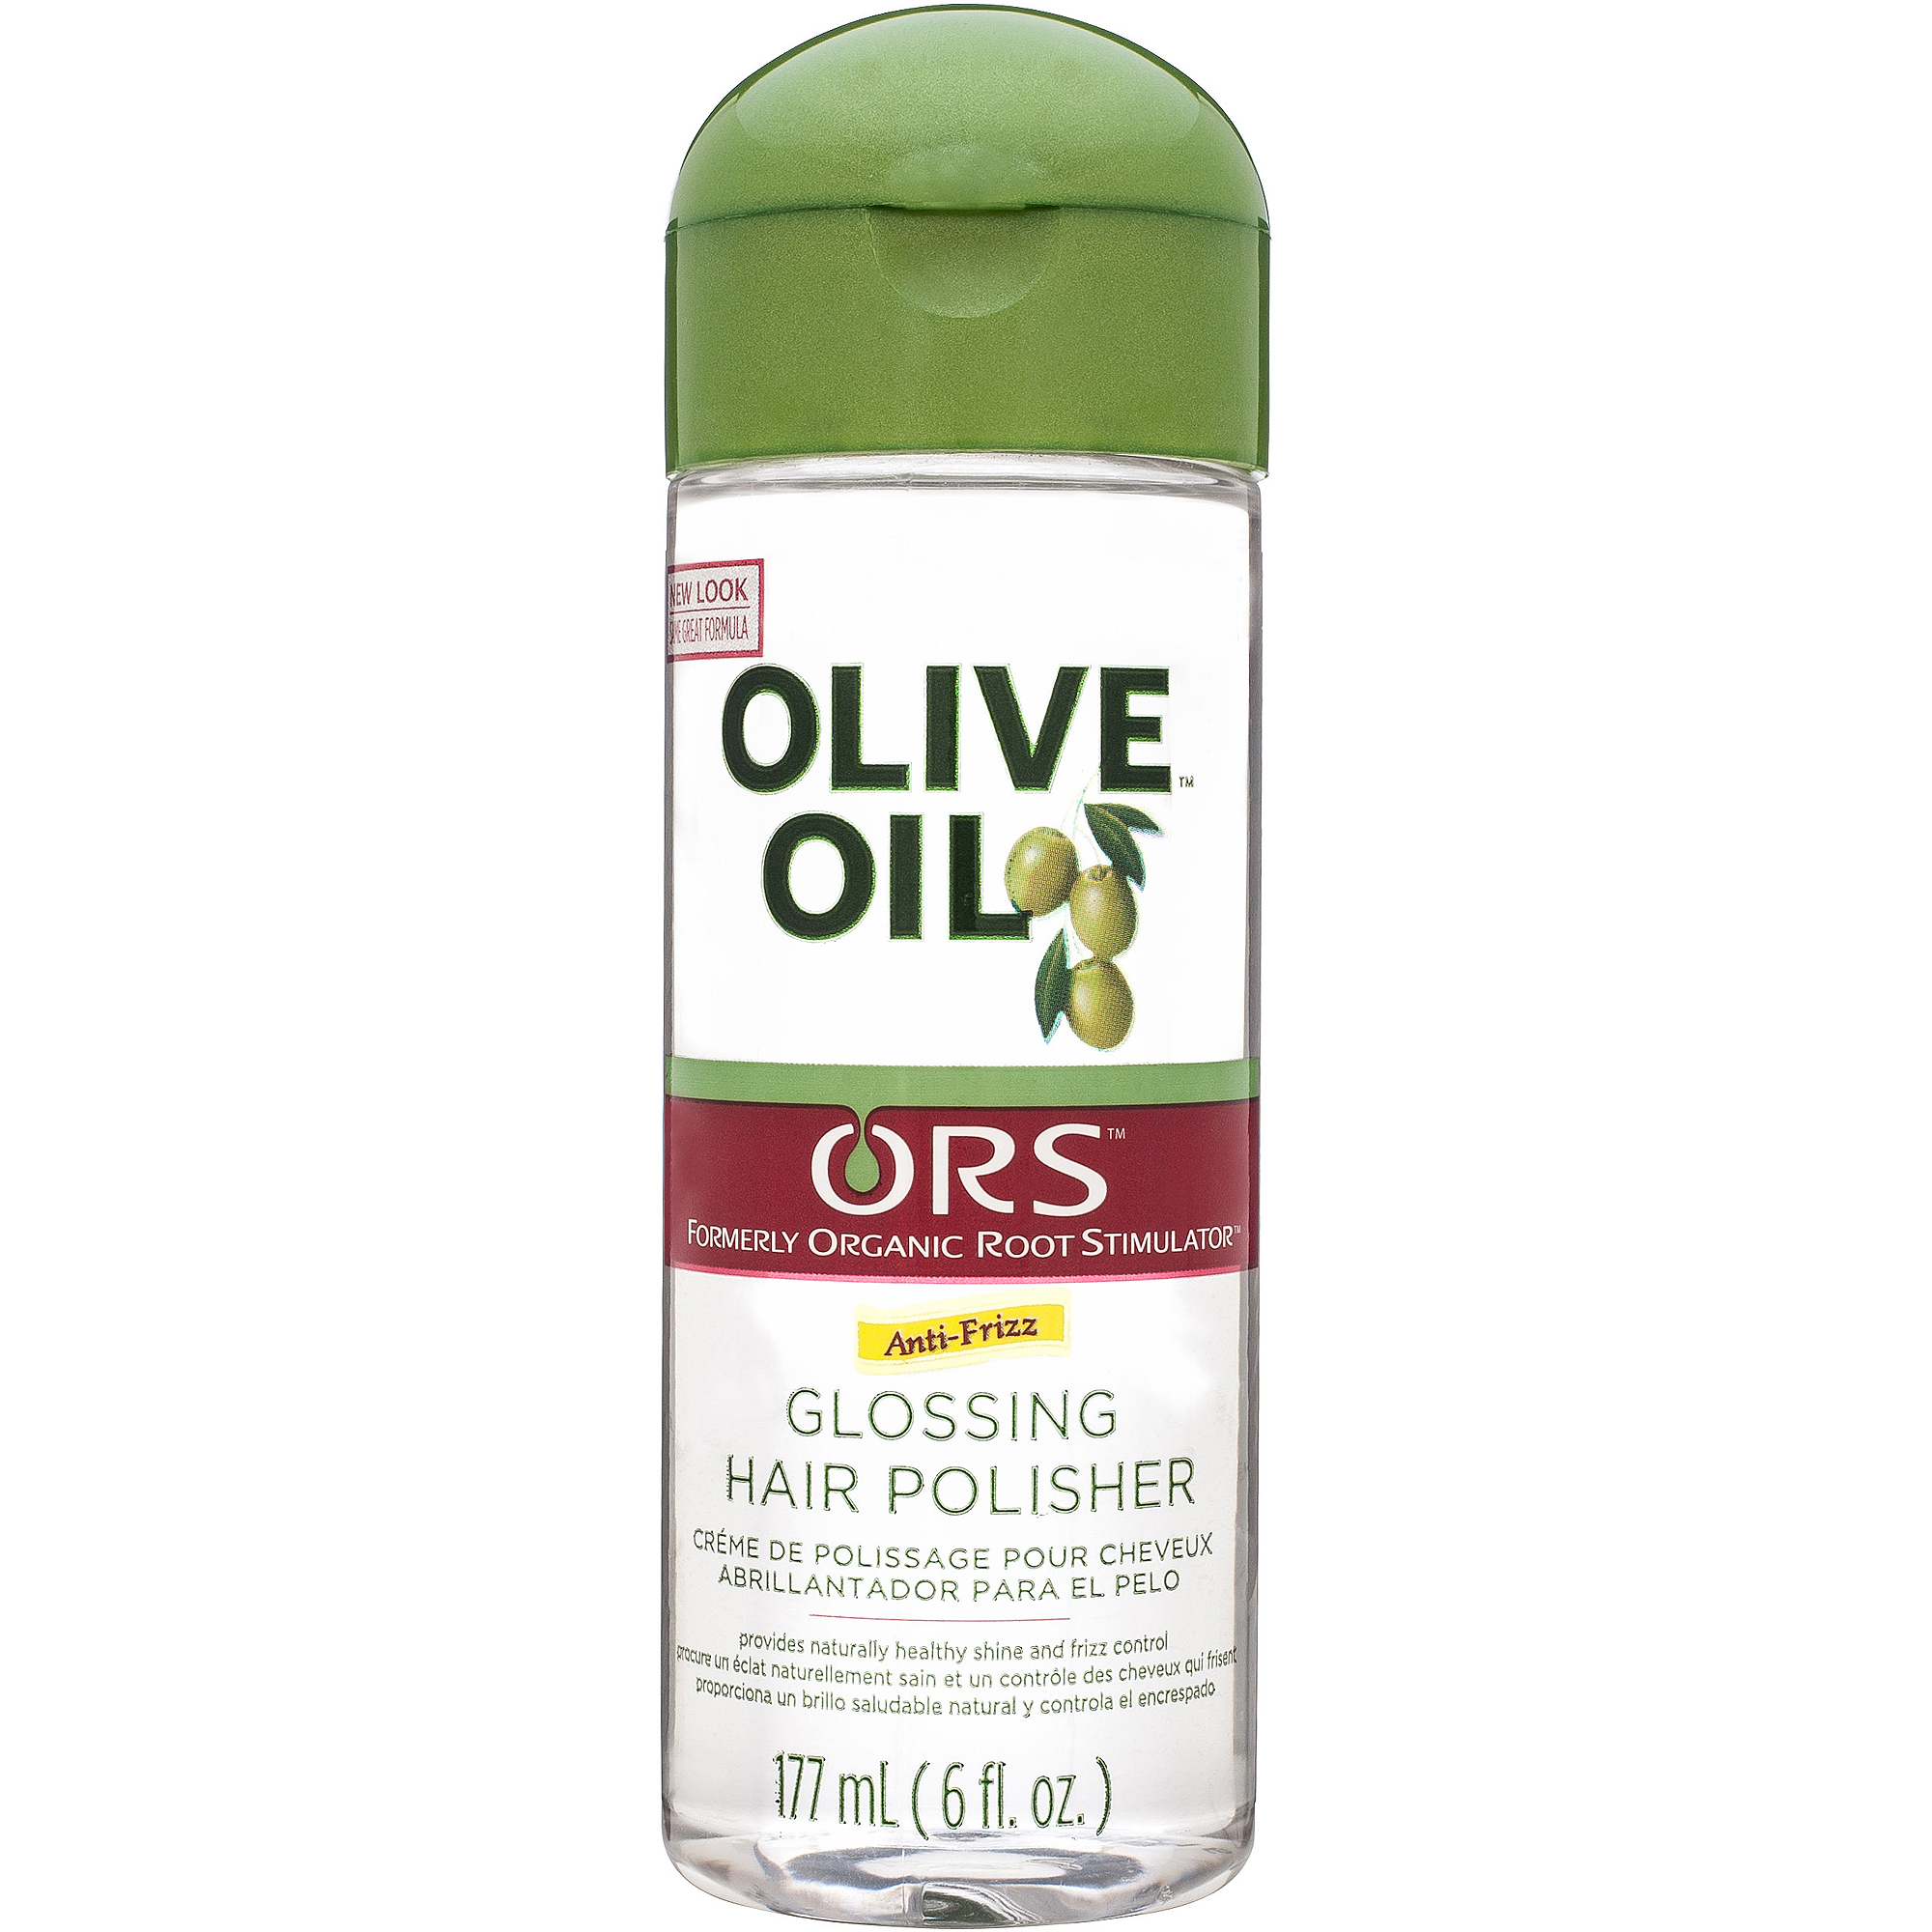 ORS Olive Oil Glossing Hair Polisher Oil with Pequi Oil for Smoothing, Frizz Control & Shine, 6 fl oz - image 1 of 4